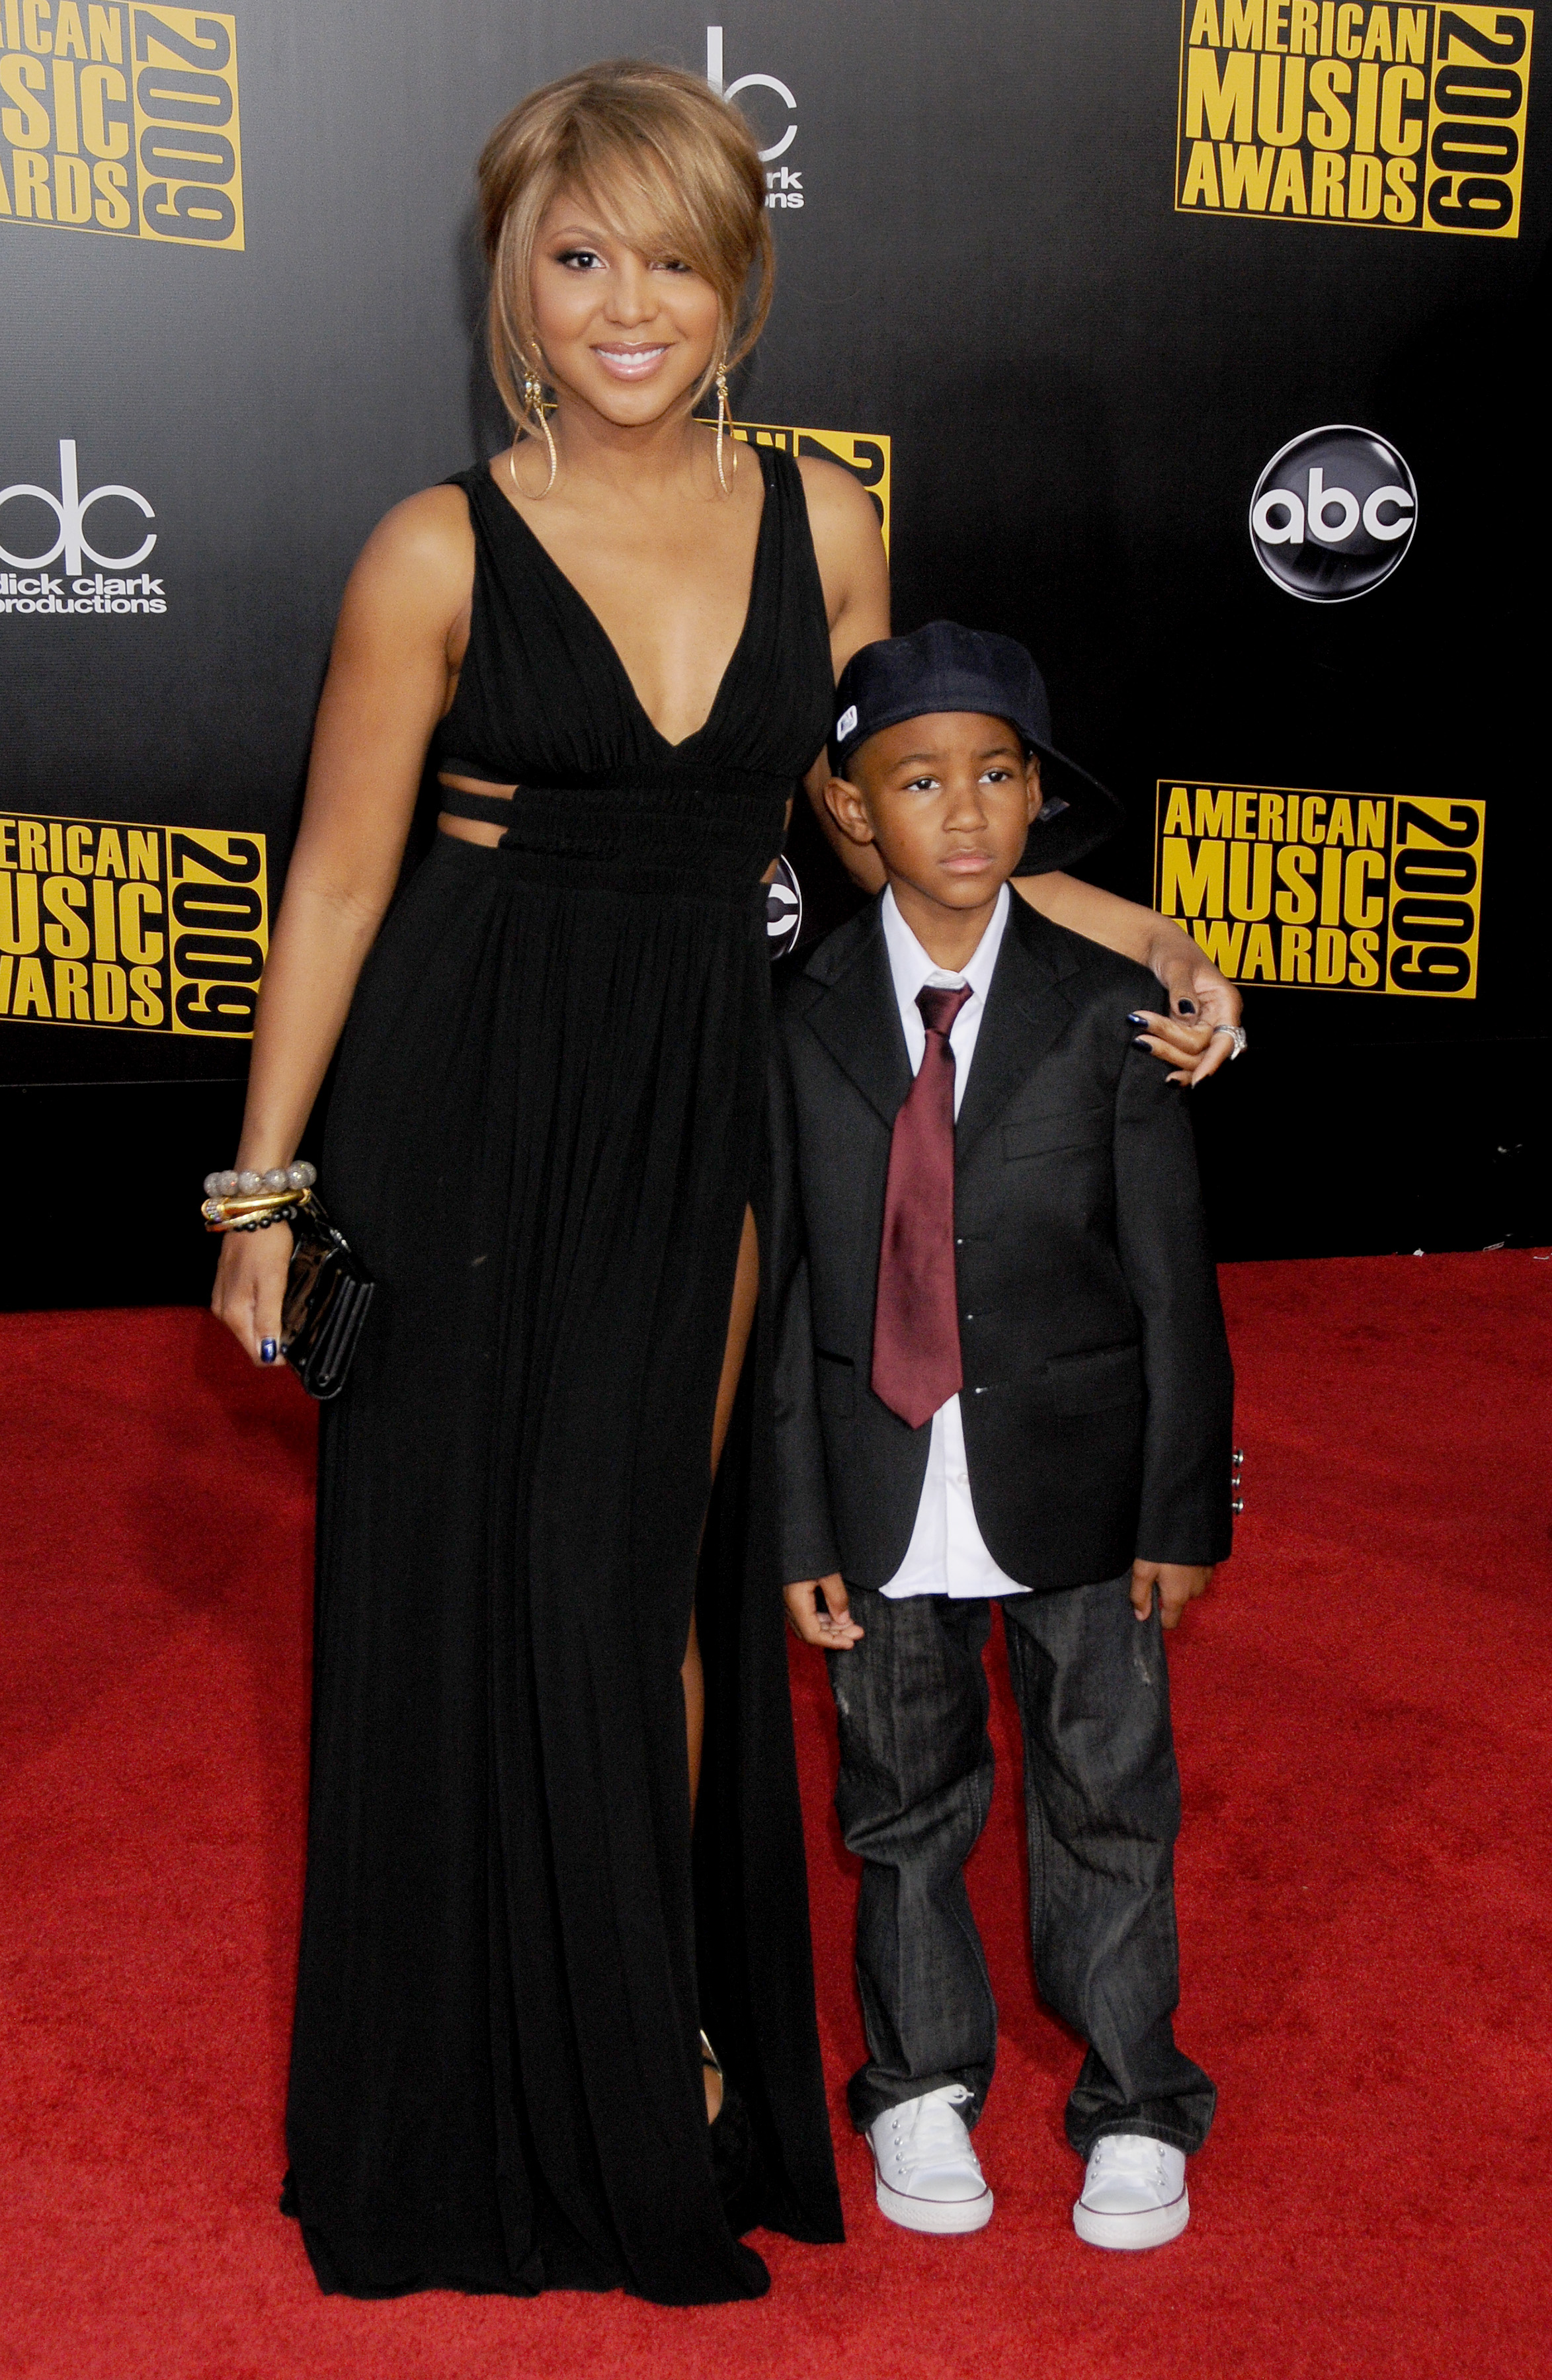 Toni Braxton and her son Diezel arrive at the American Music Awards on November 22, 2009, in Los Angeles, California | Source: Getty Images